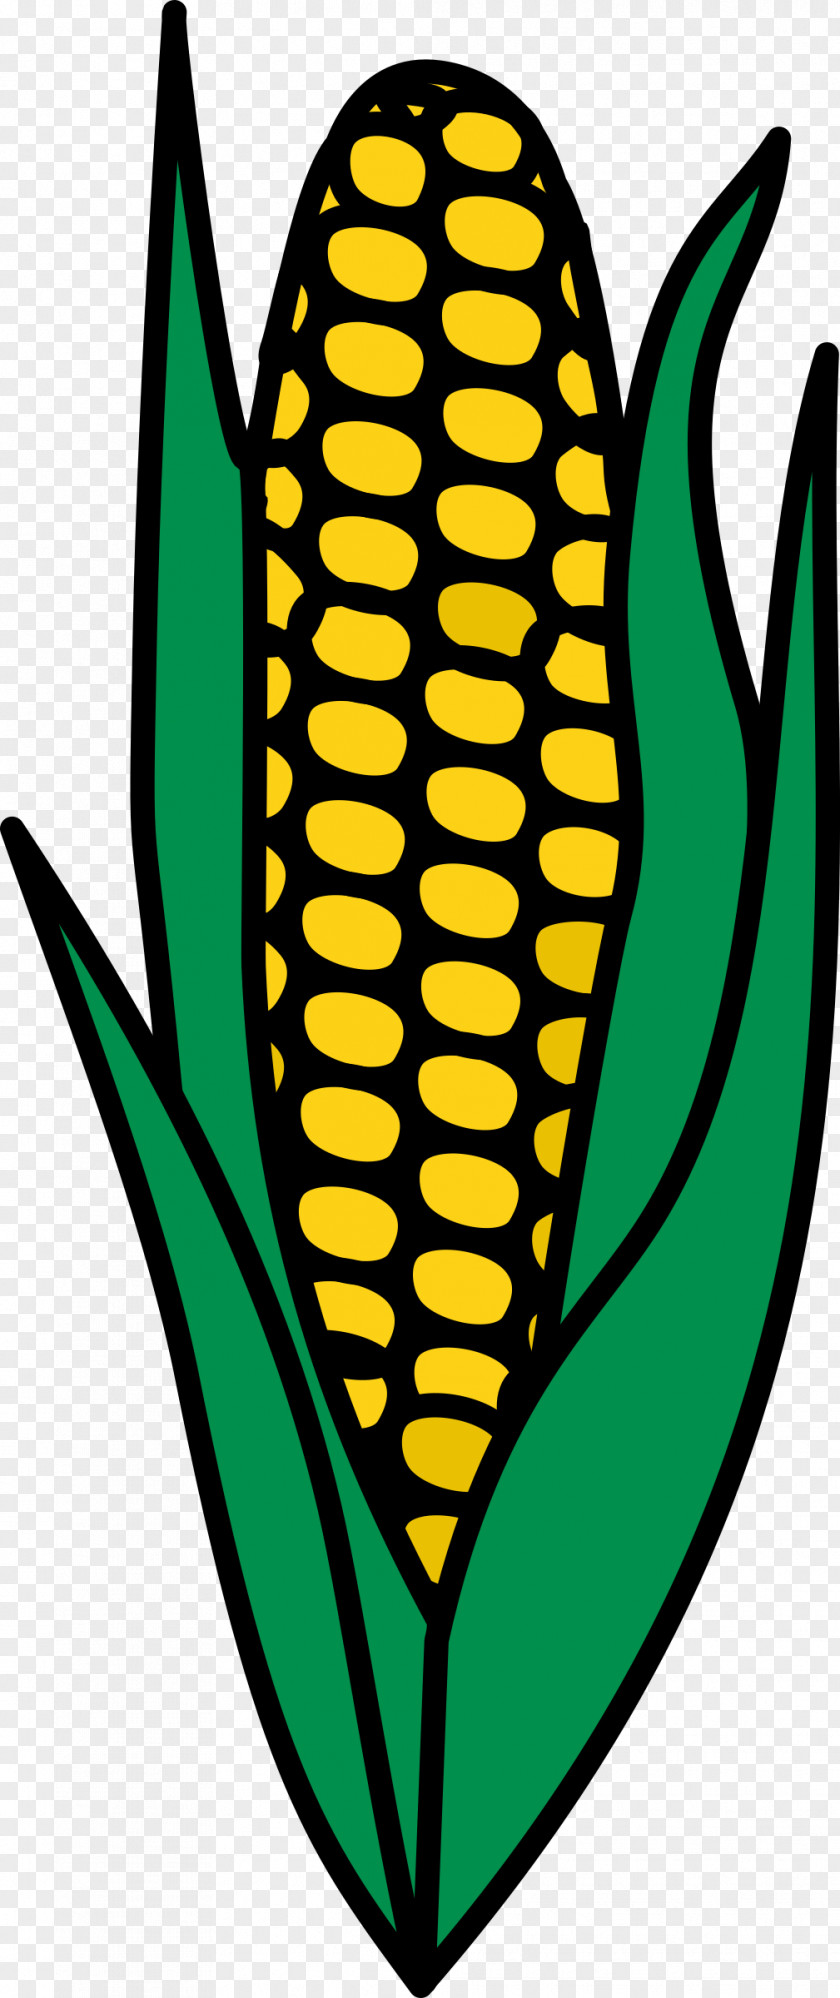 Coat Of Arms Corn On The Cob Maize Food Allergy Clip Art PNG